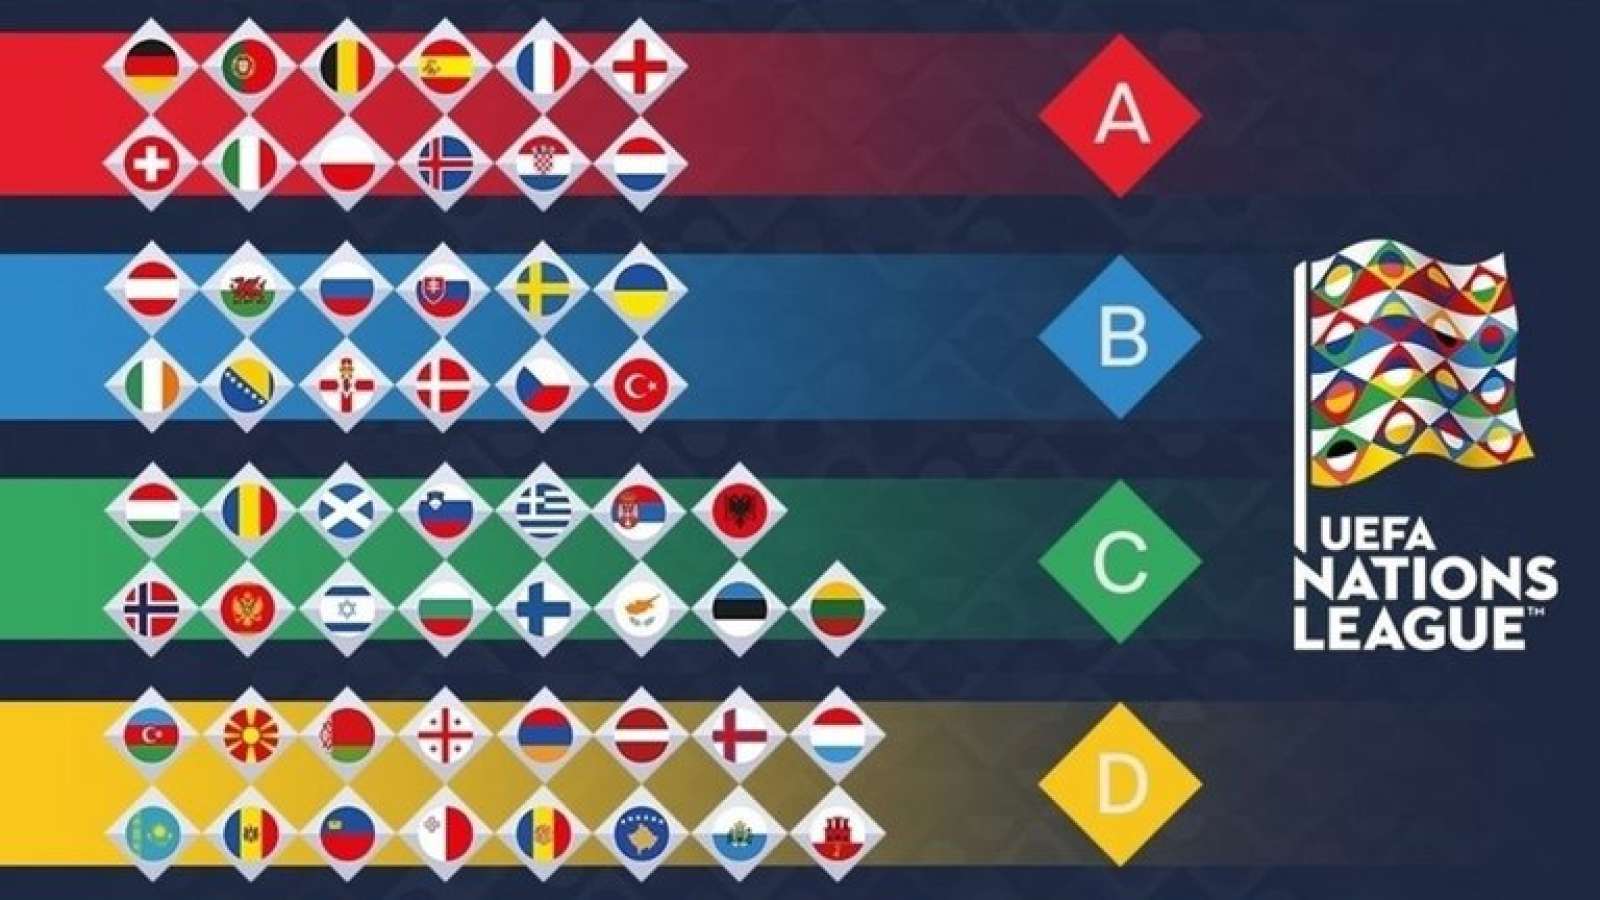 Football News: All you need to know about the UEFA Nations League